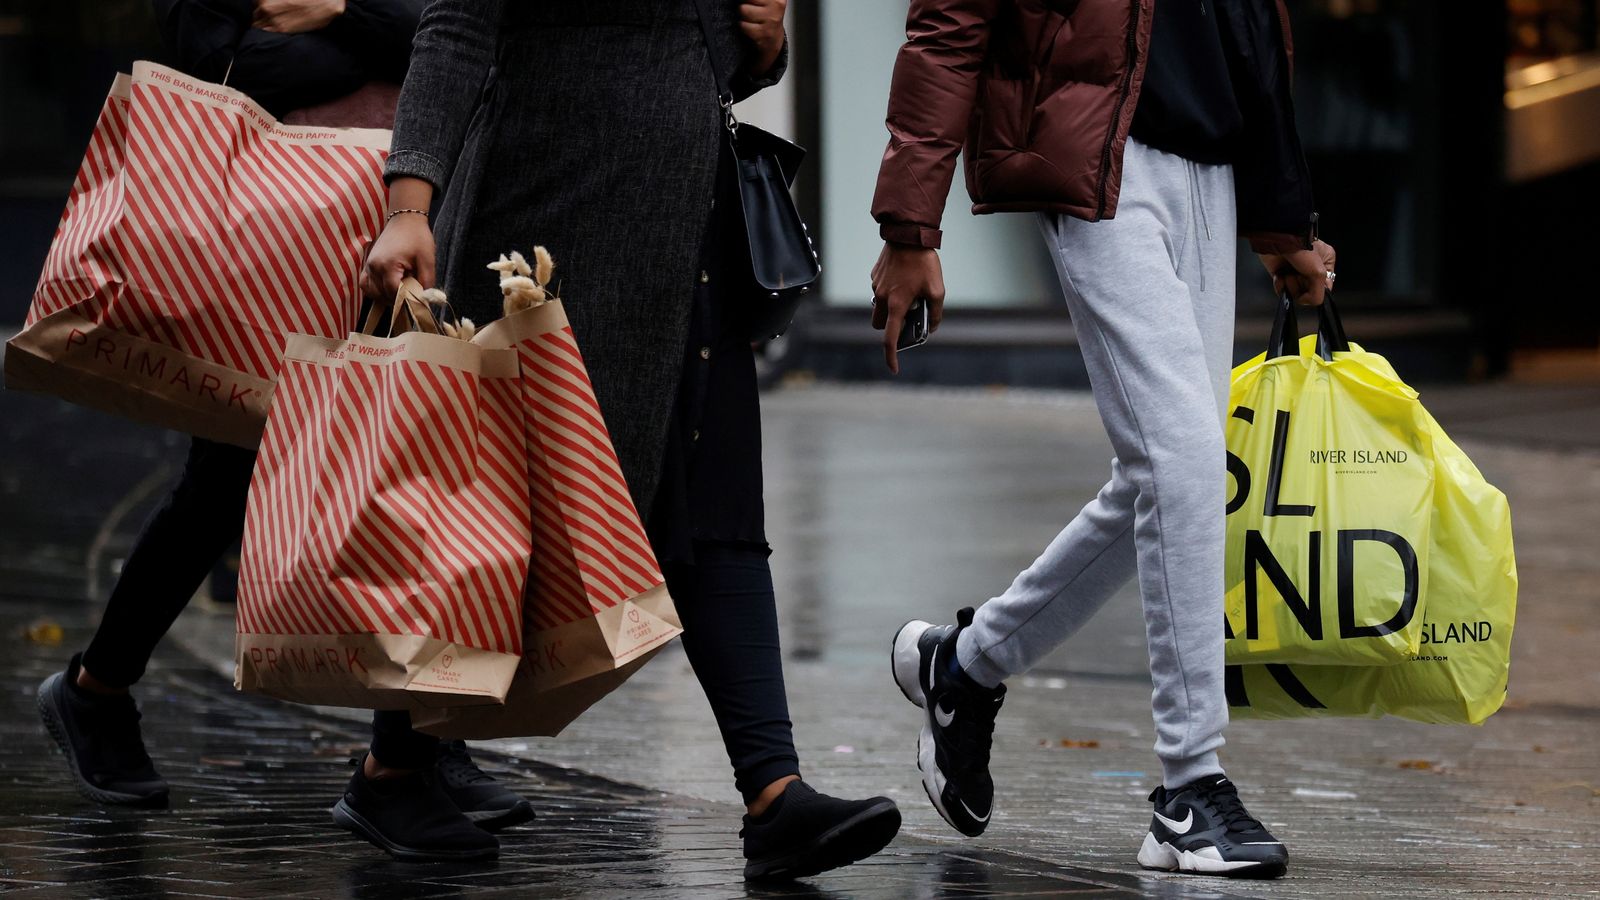 Inflation in UK shops now back at 'normal levels' - as prices for some items fall